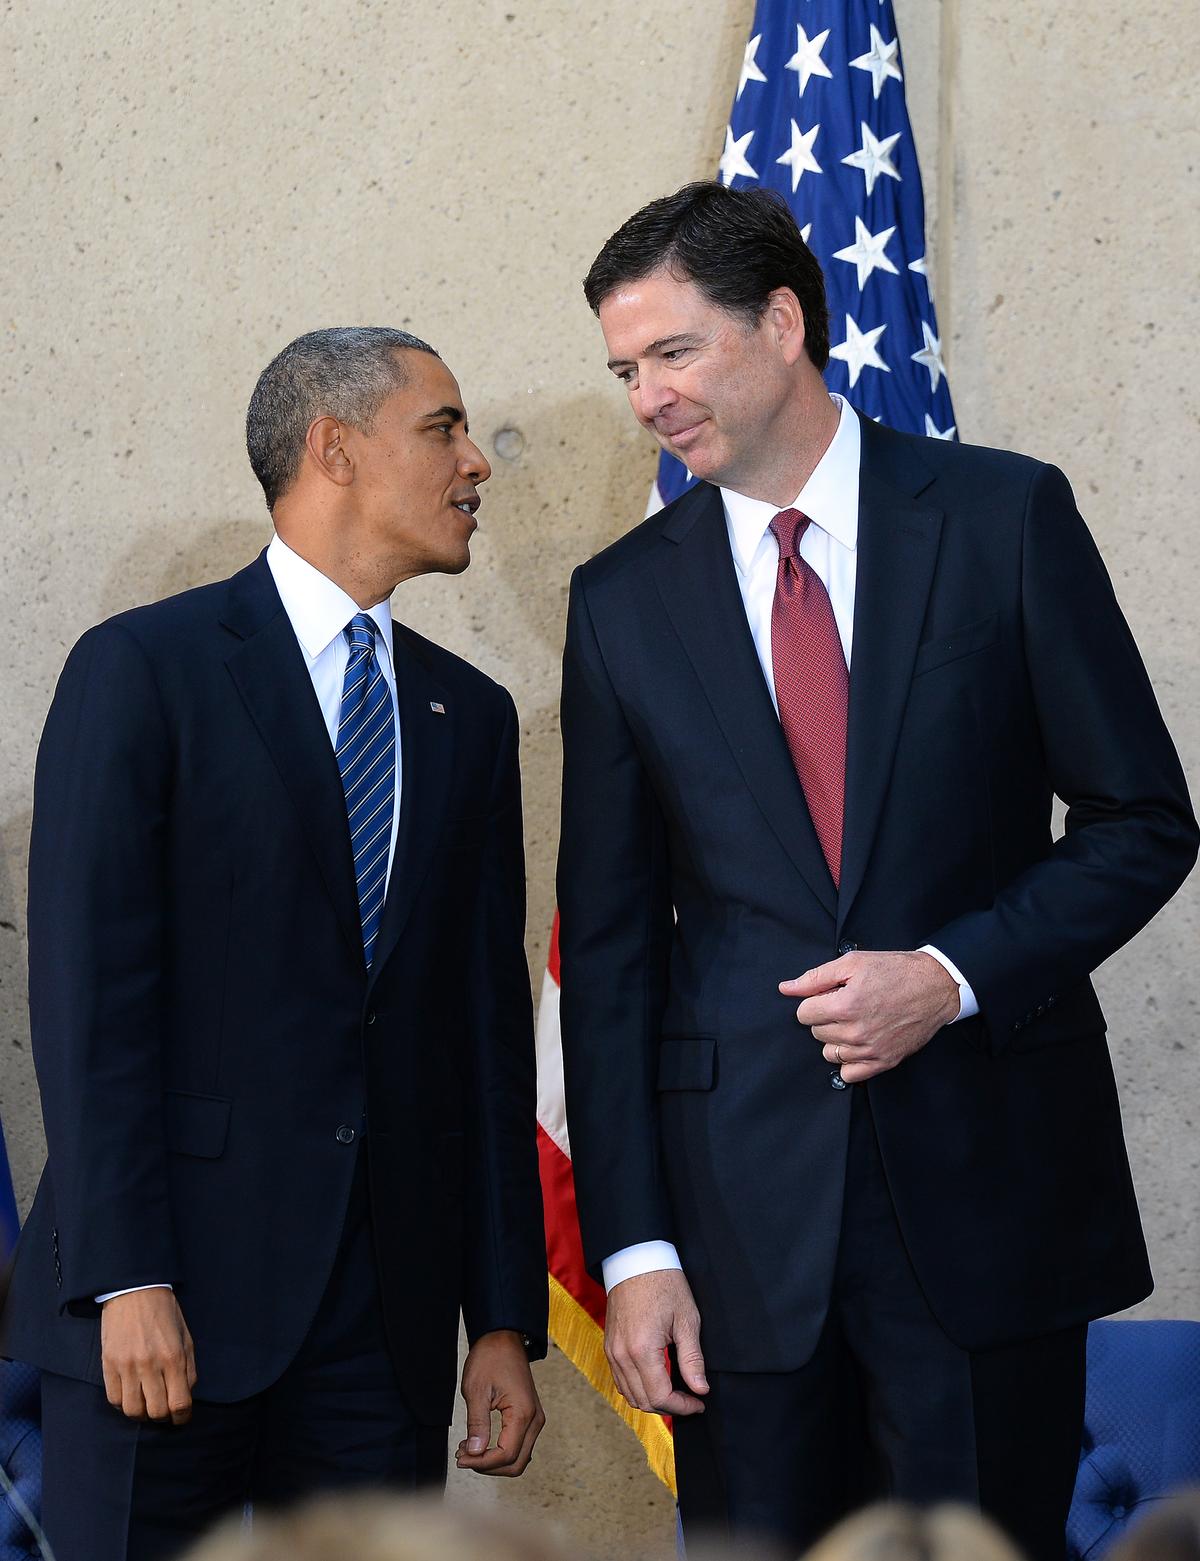 President Barack Obama (L) talks with new Federal Bureau of Investigation (FBI) director James Comey during his installation ceremony at the FBI headquarters in Washington on October 28, 2013. (JEWEL SAMAD/AFP/Getty Images)